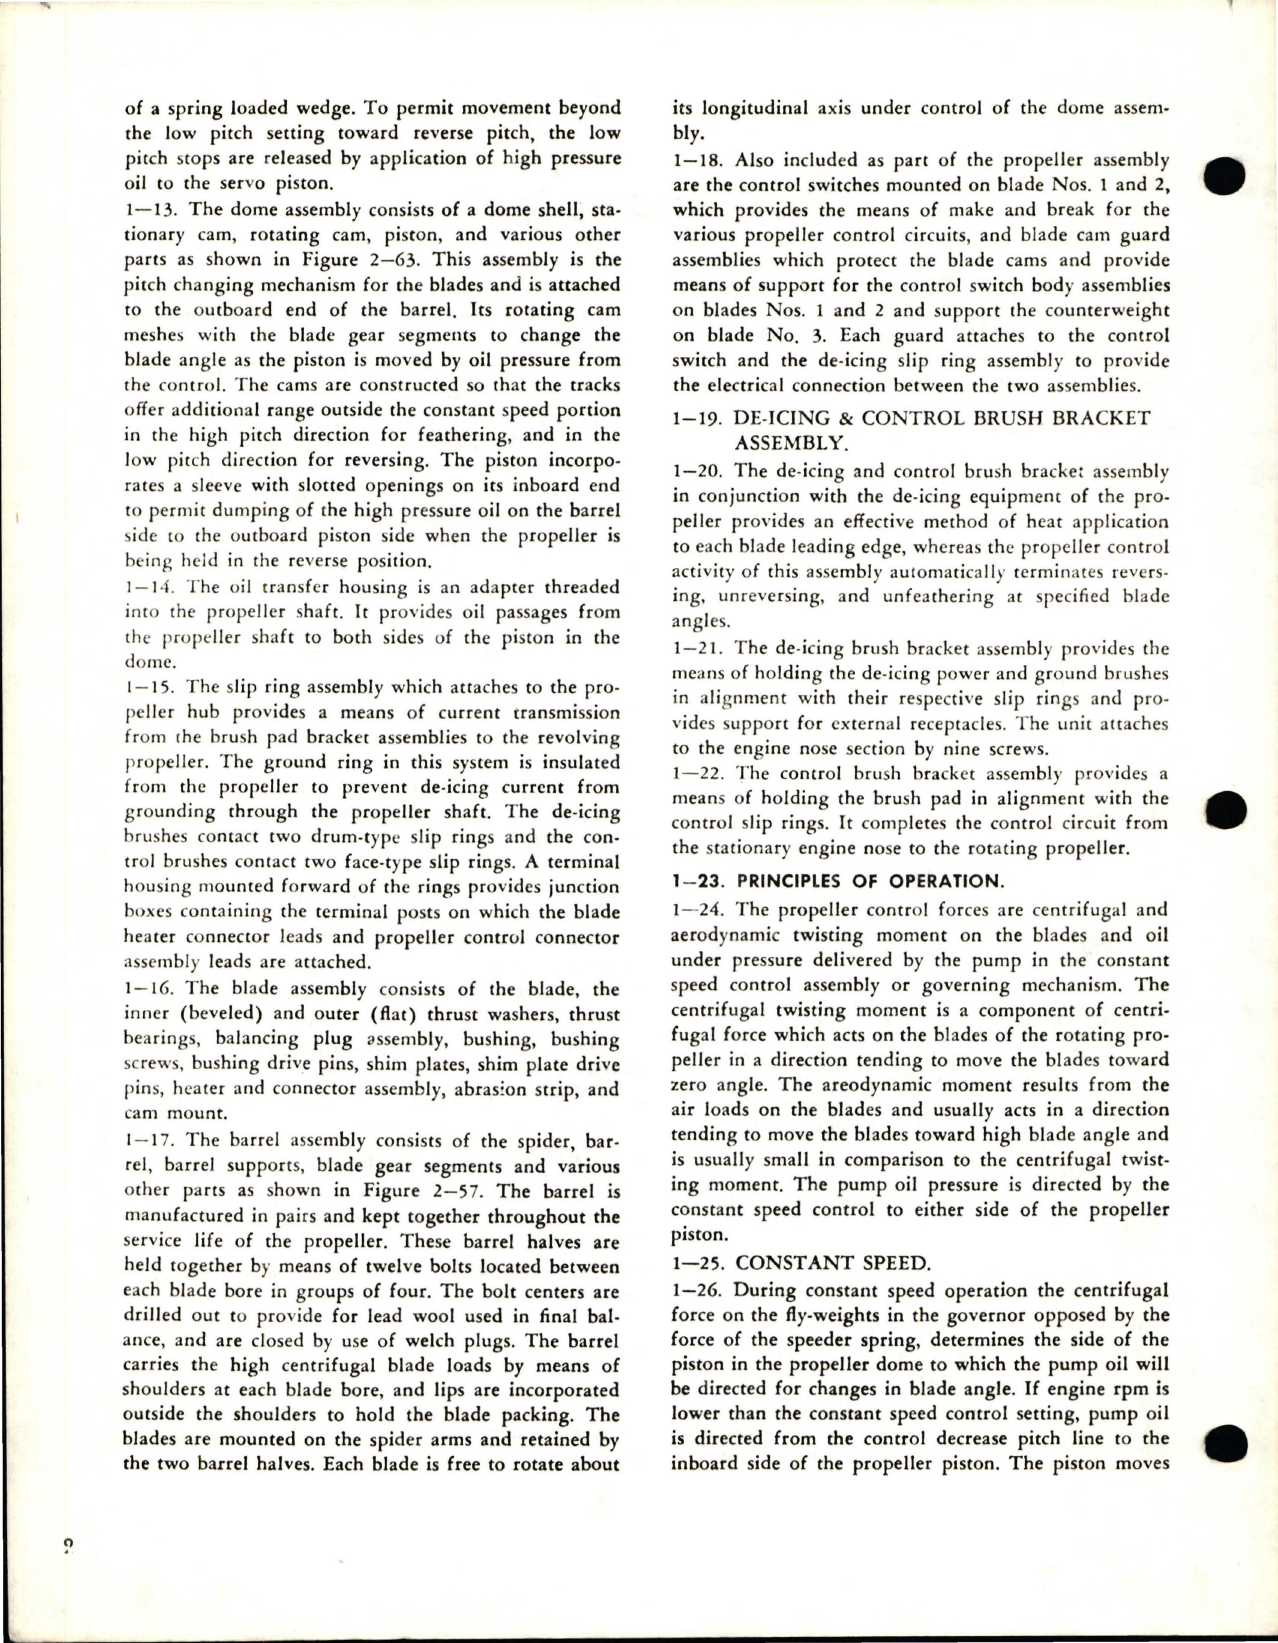 Sample page 8 from AirCorps Library document: Overhaul Manual for Hydromatic Reversing Propellers - Model 43E60